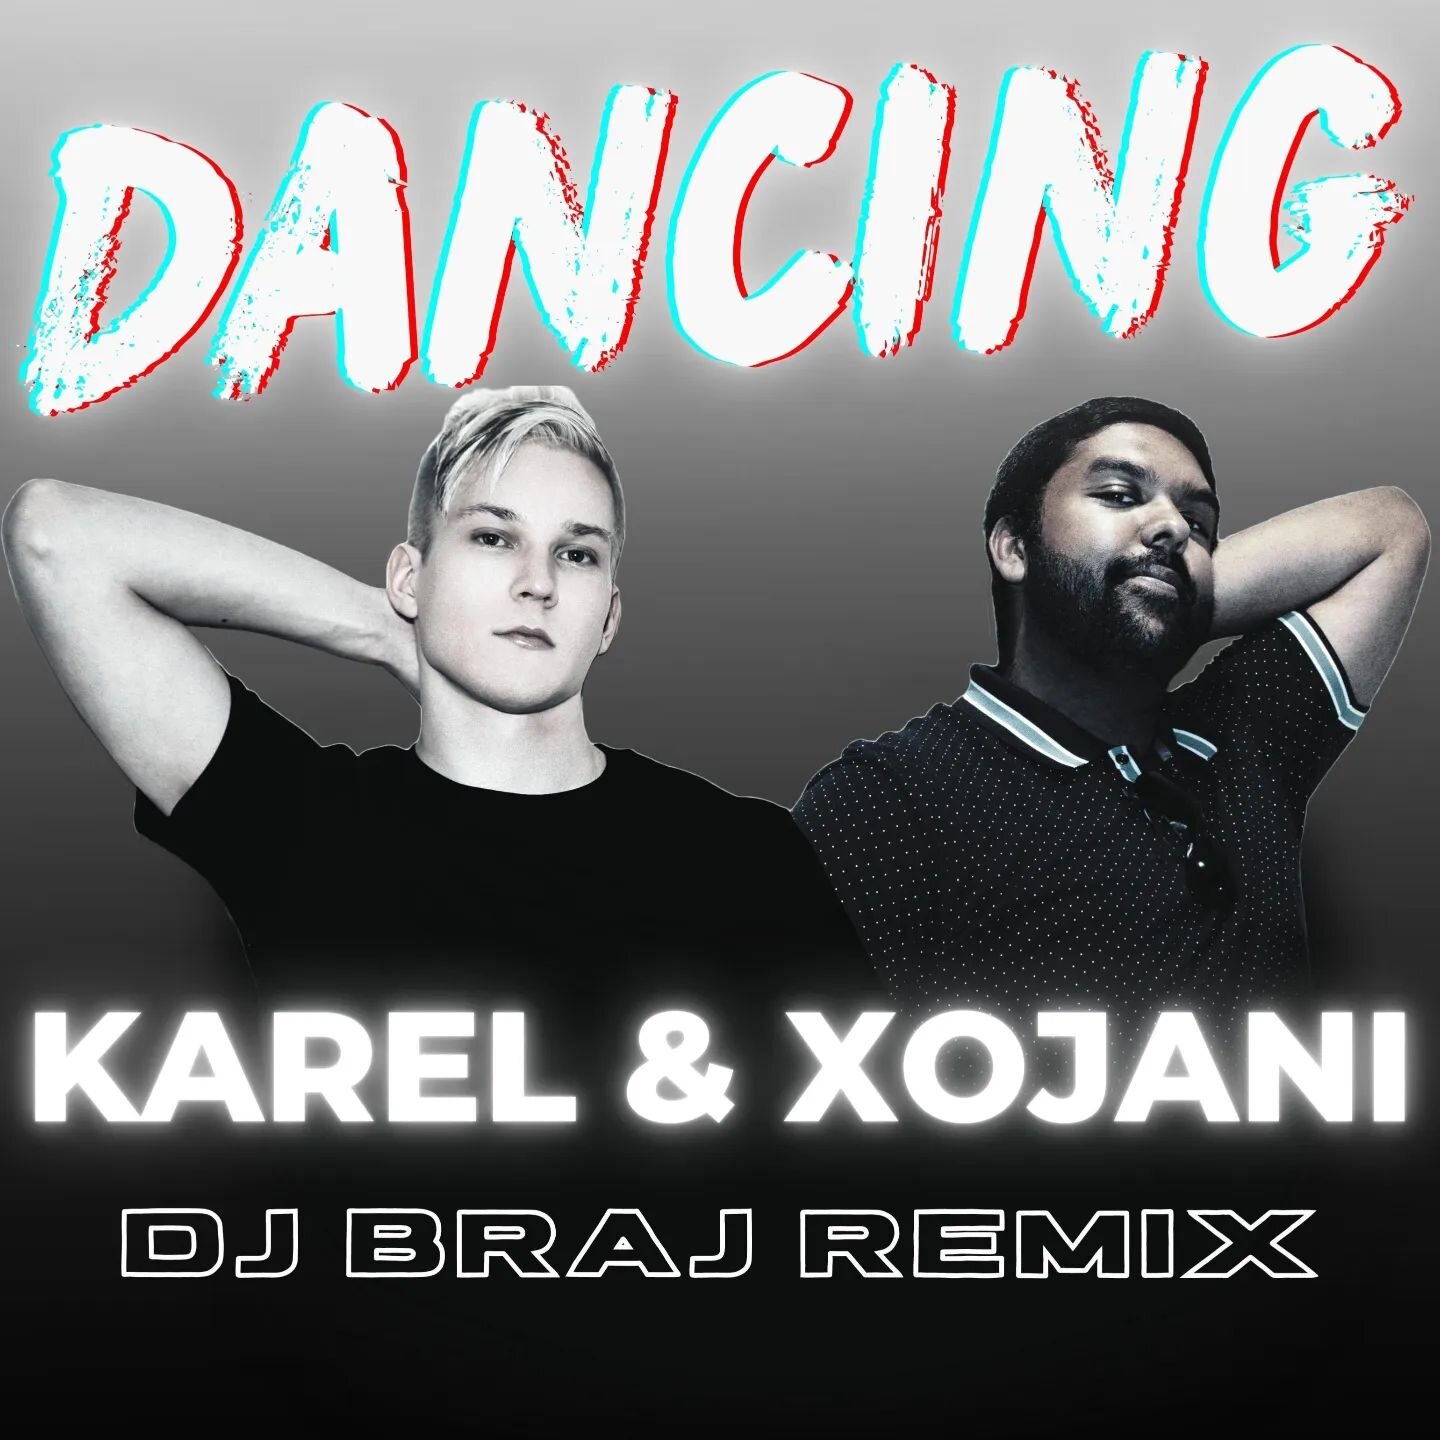 Celebrating 5 years of 'Dancing' @polarbullproductions will be releasing the @djbrajmusic #remix of @karexojani #billboard charting song that started it all 🙌 will soon be available for preorder and presaving so stay tuned! Out on all platforms June